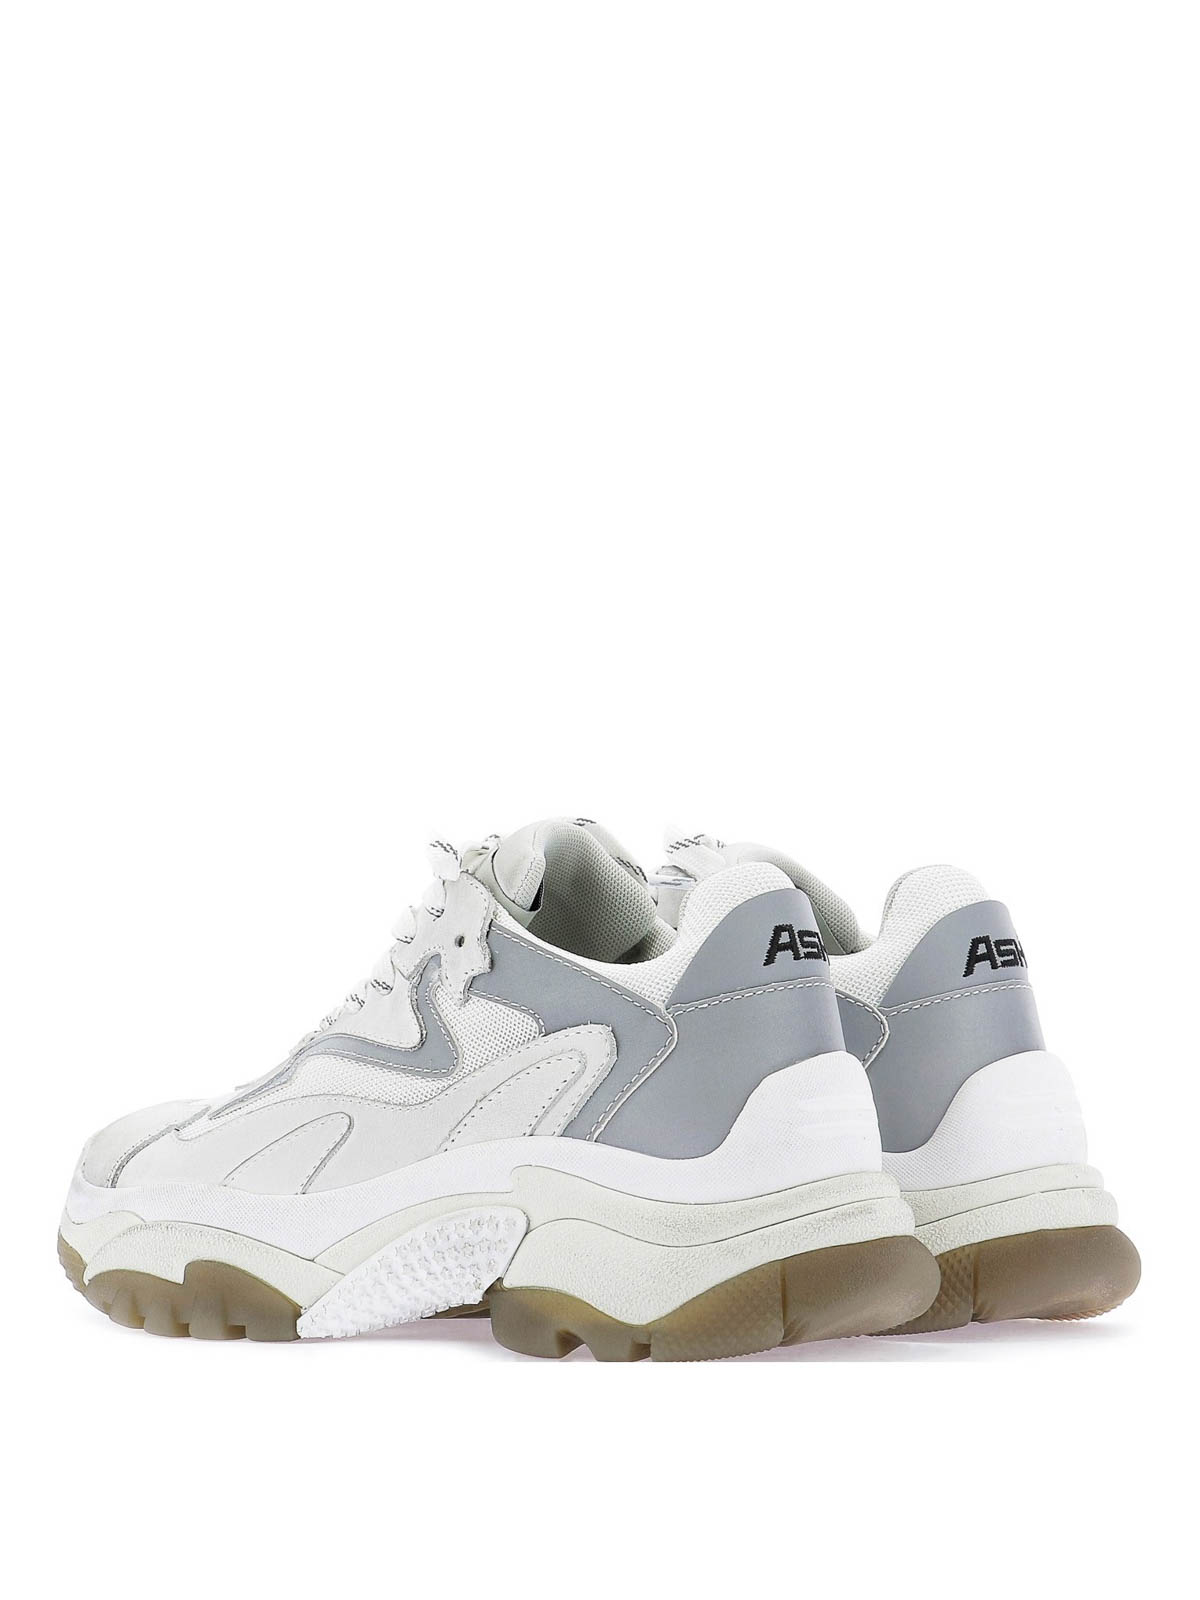 wat betreft Politieagent leider Trainers Ash - Addict sneakers in white and grey - ADDICTCOMBOJSILVER